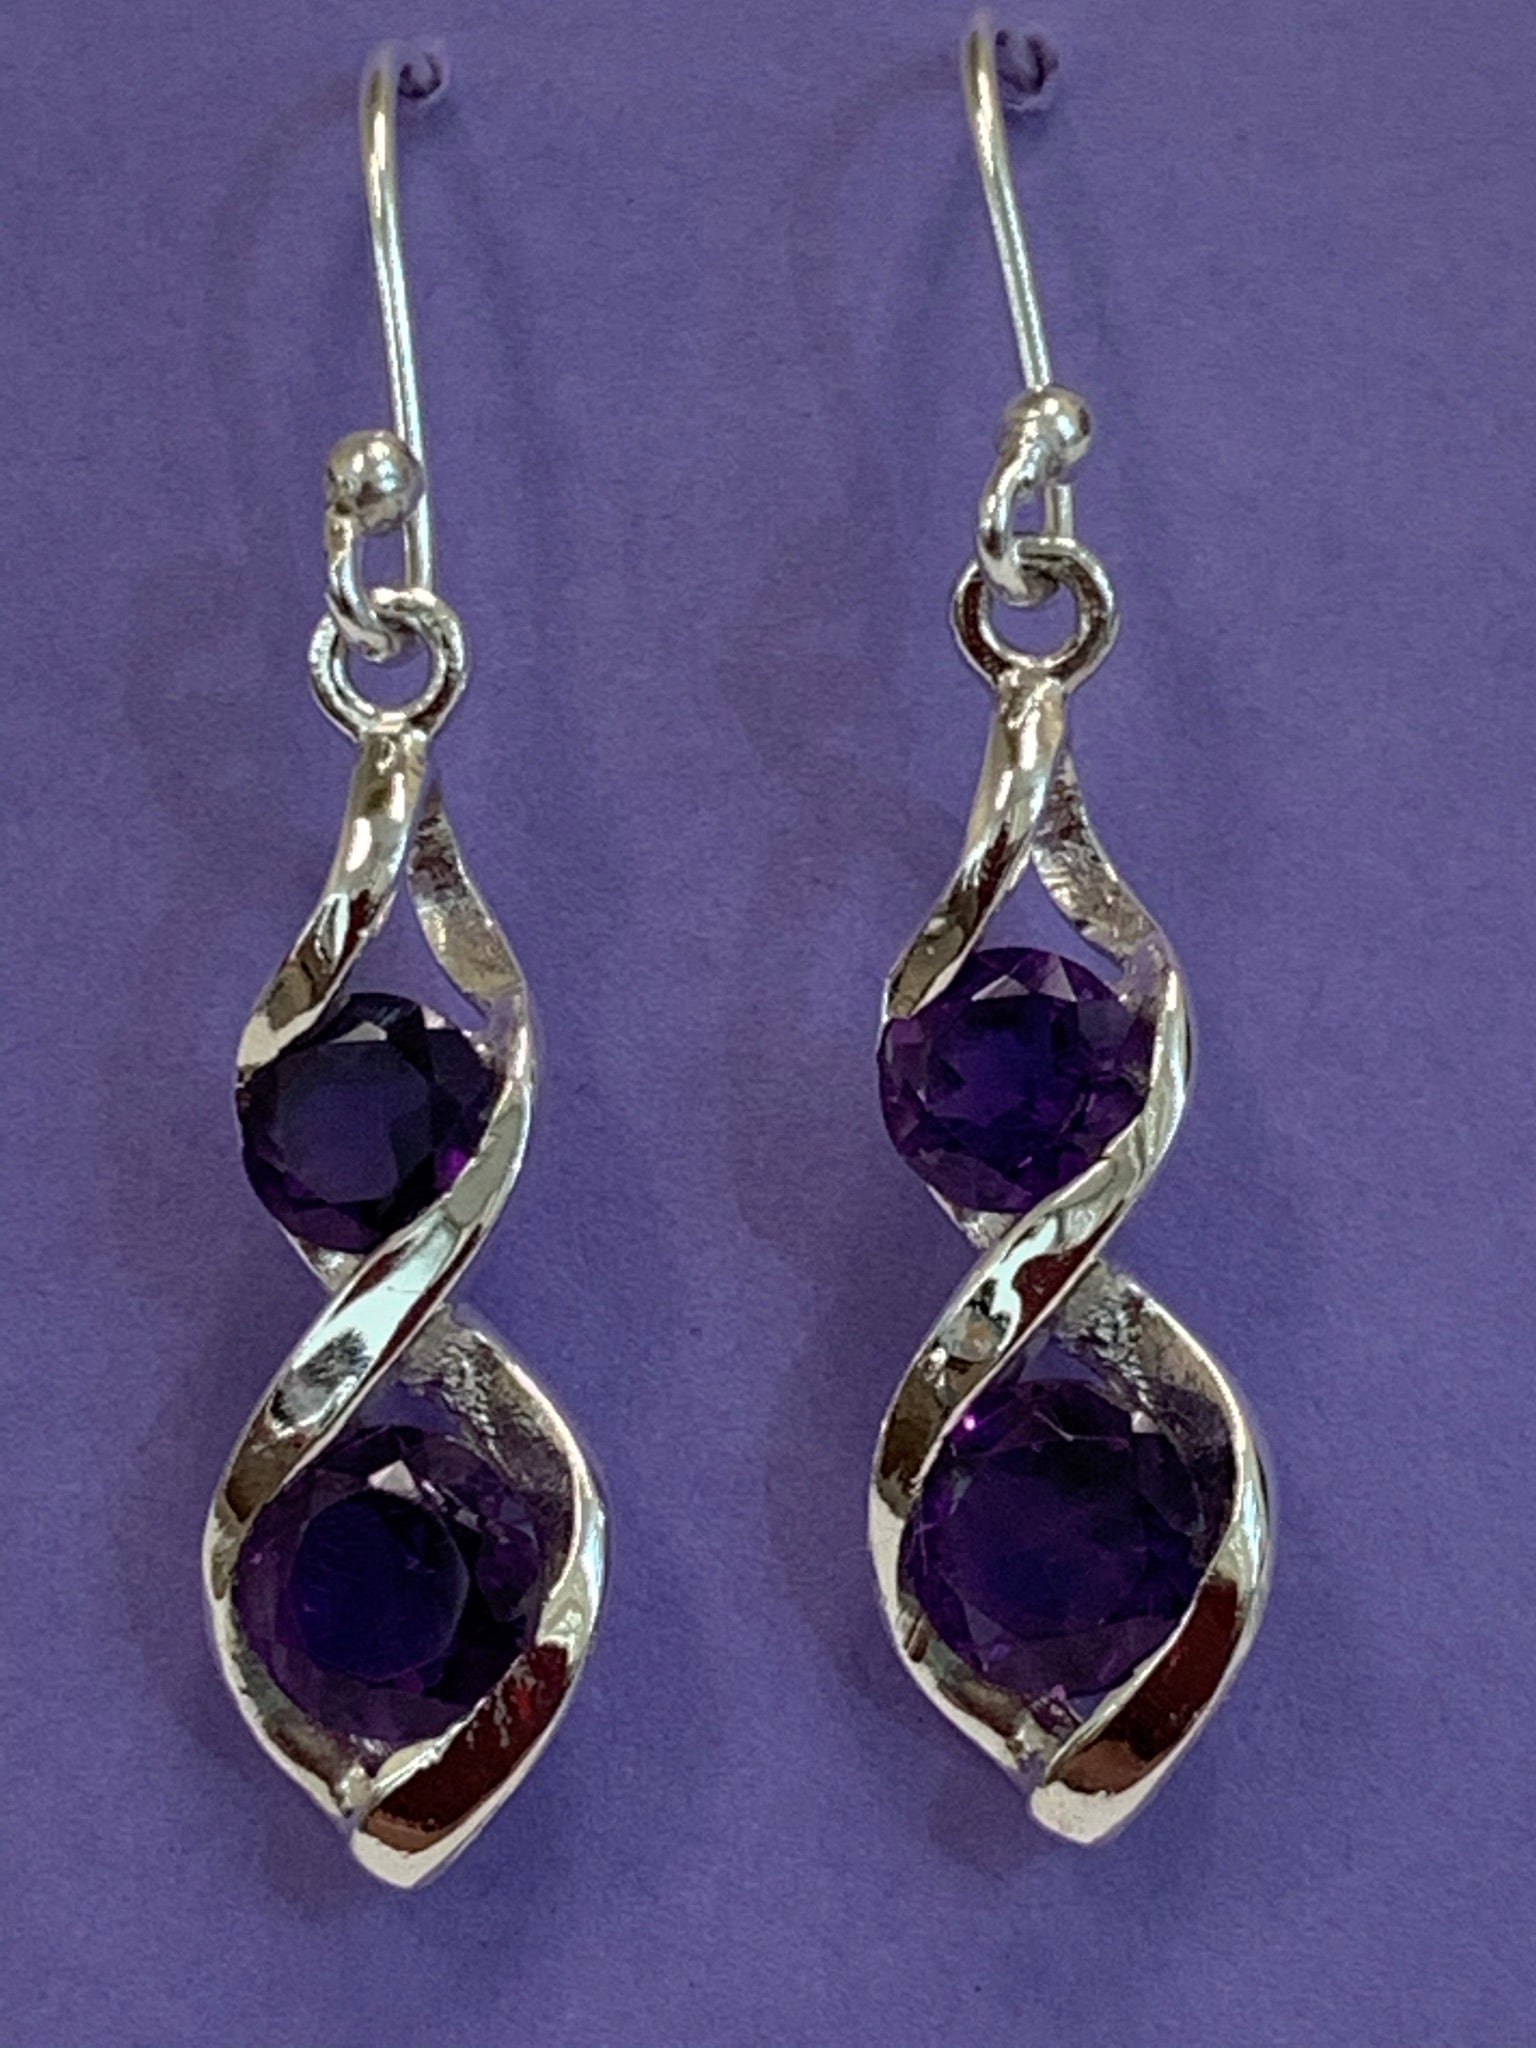 Close-up view. Two amethyst gemstones are set into each of the sterling silver earrings in a "twister" setting (like a stylized figure 8), one in the top part of the eight and one in the bottom. These earrings are lightweight, have wires, not posts and are approximately 1¼" long.